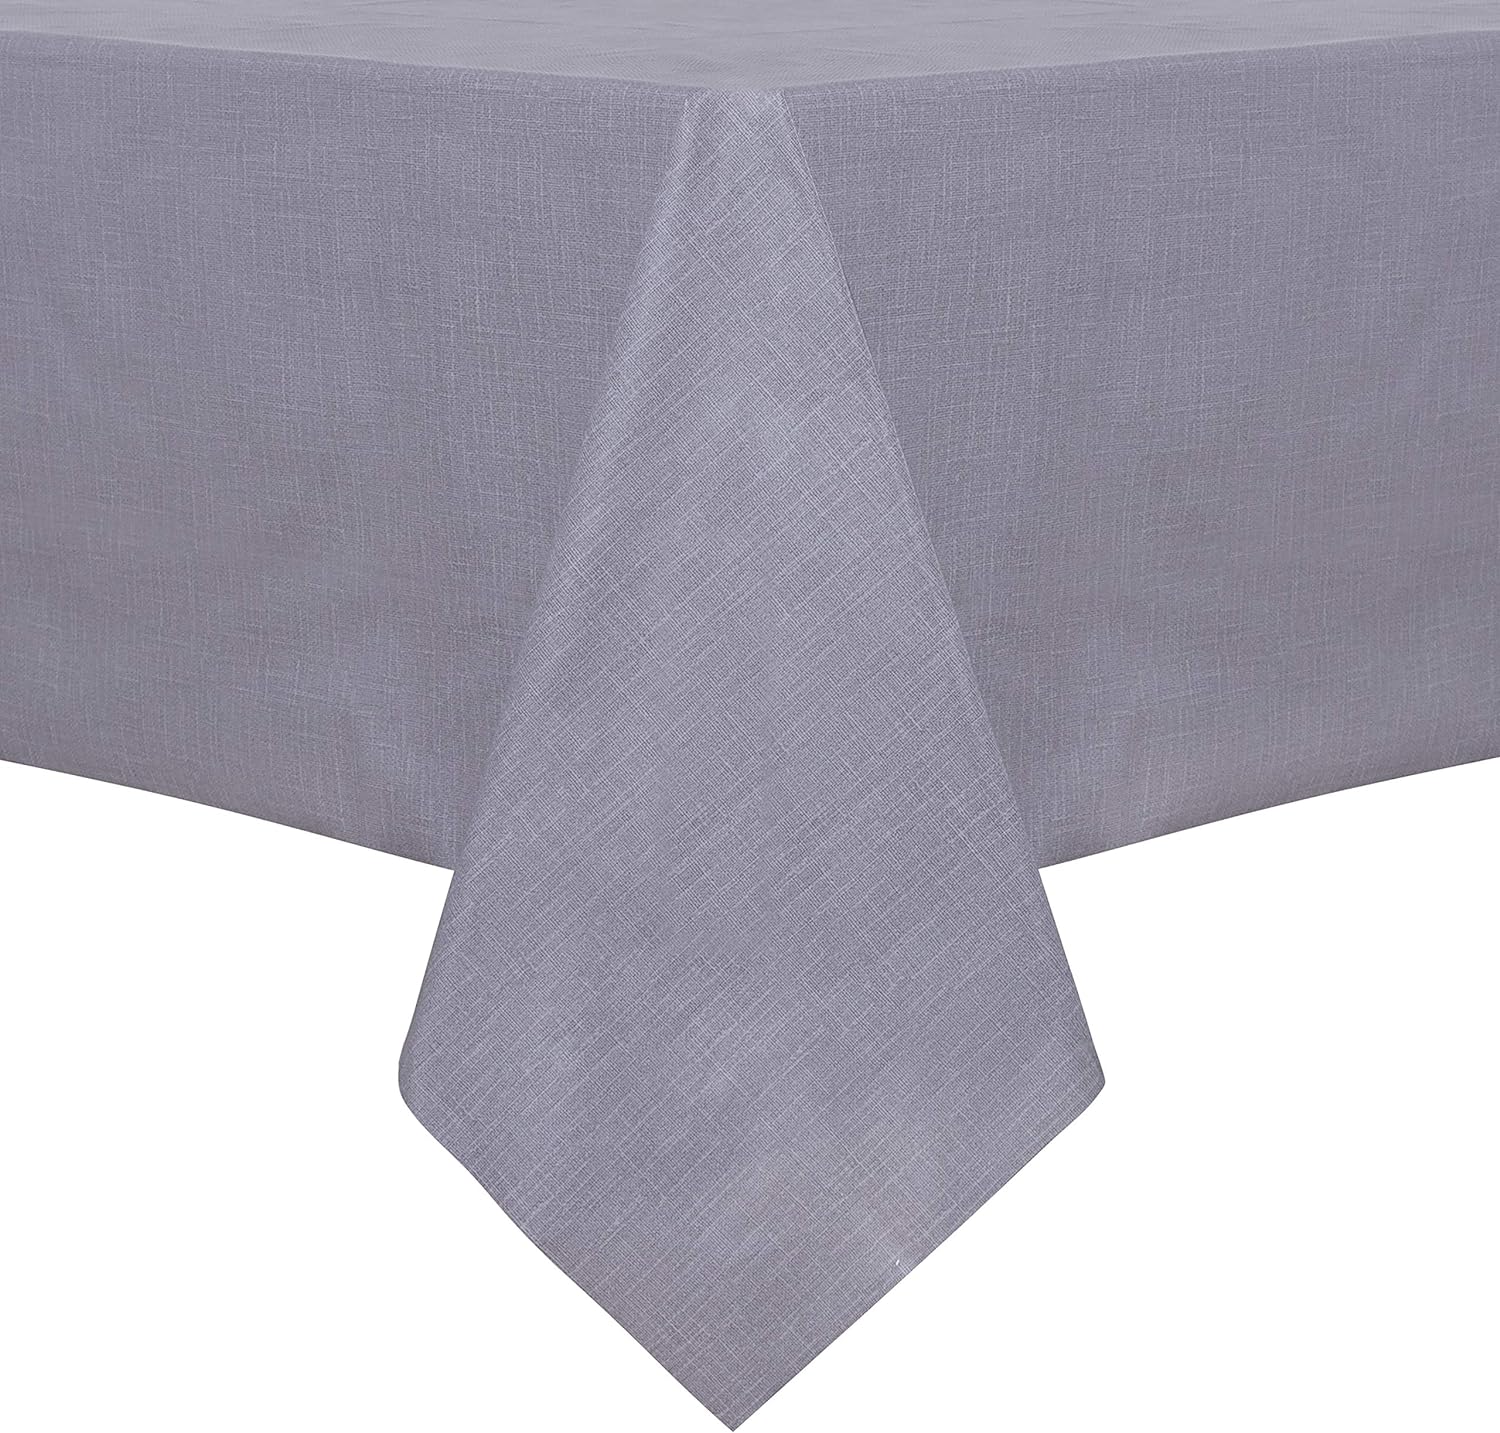 sancua 100% Waterproof Rectangle PVC Tablecloth - 52 x 70 Inch - Oil Proof Spill Proof Vinyl Table Cloth, Wipe Clean Table Cover for Dining Table, Buffet Parties and Camping, Grey